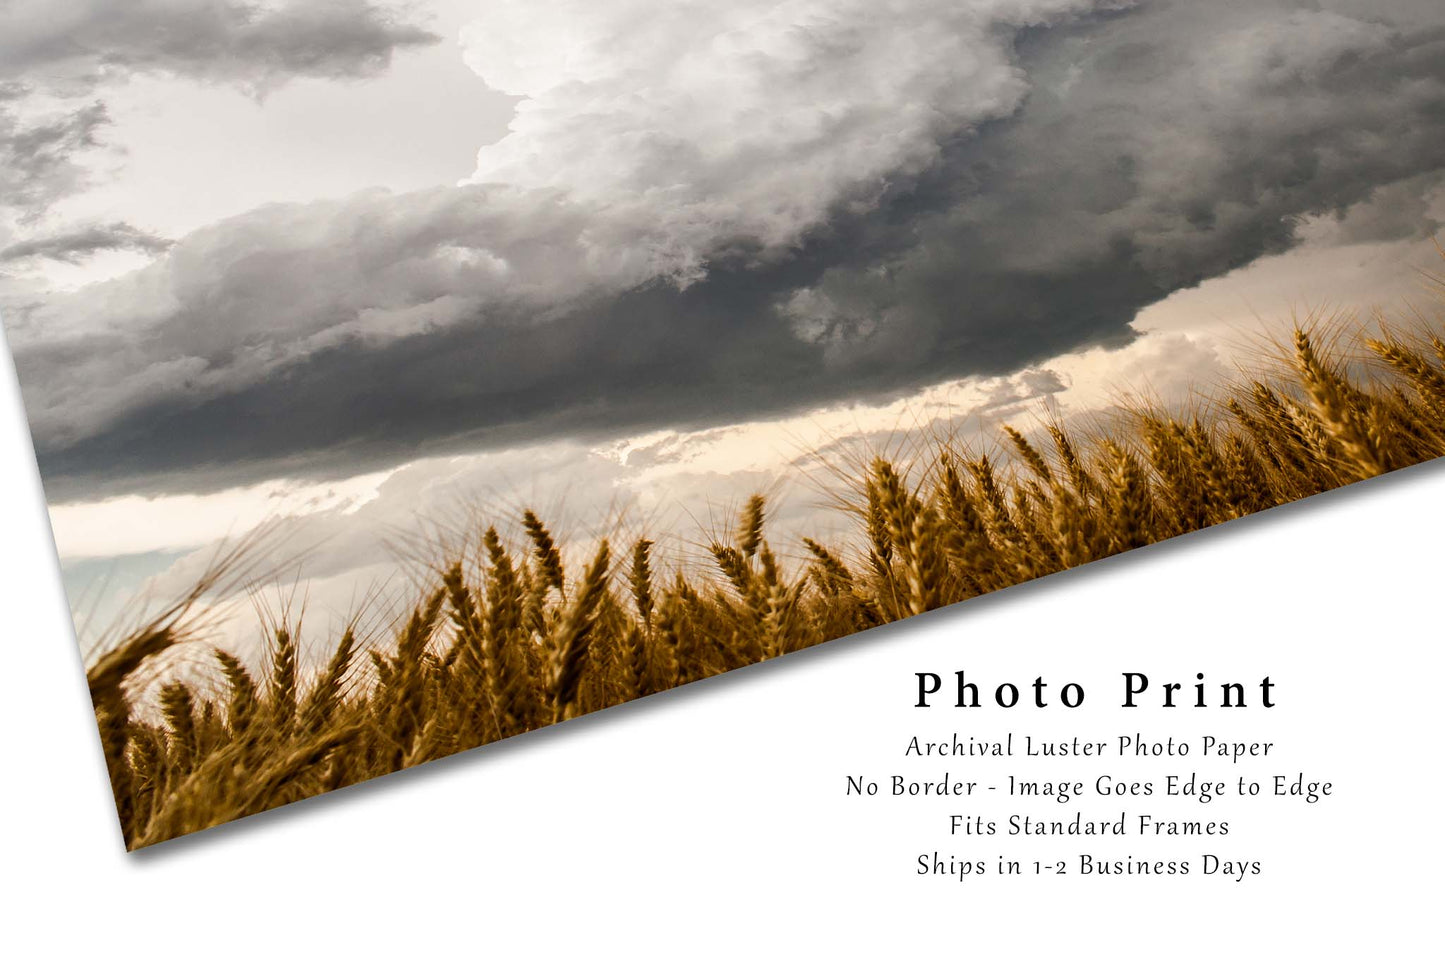 Country Photography Print (Not Framed) Picture of Storm Cloud Brewing Over Golden Wheat Stalks on Spring Day in Kansas Thunderstorm Wall Art Farmhouse Decor